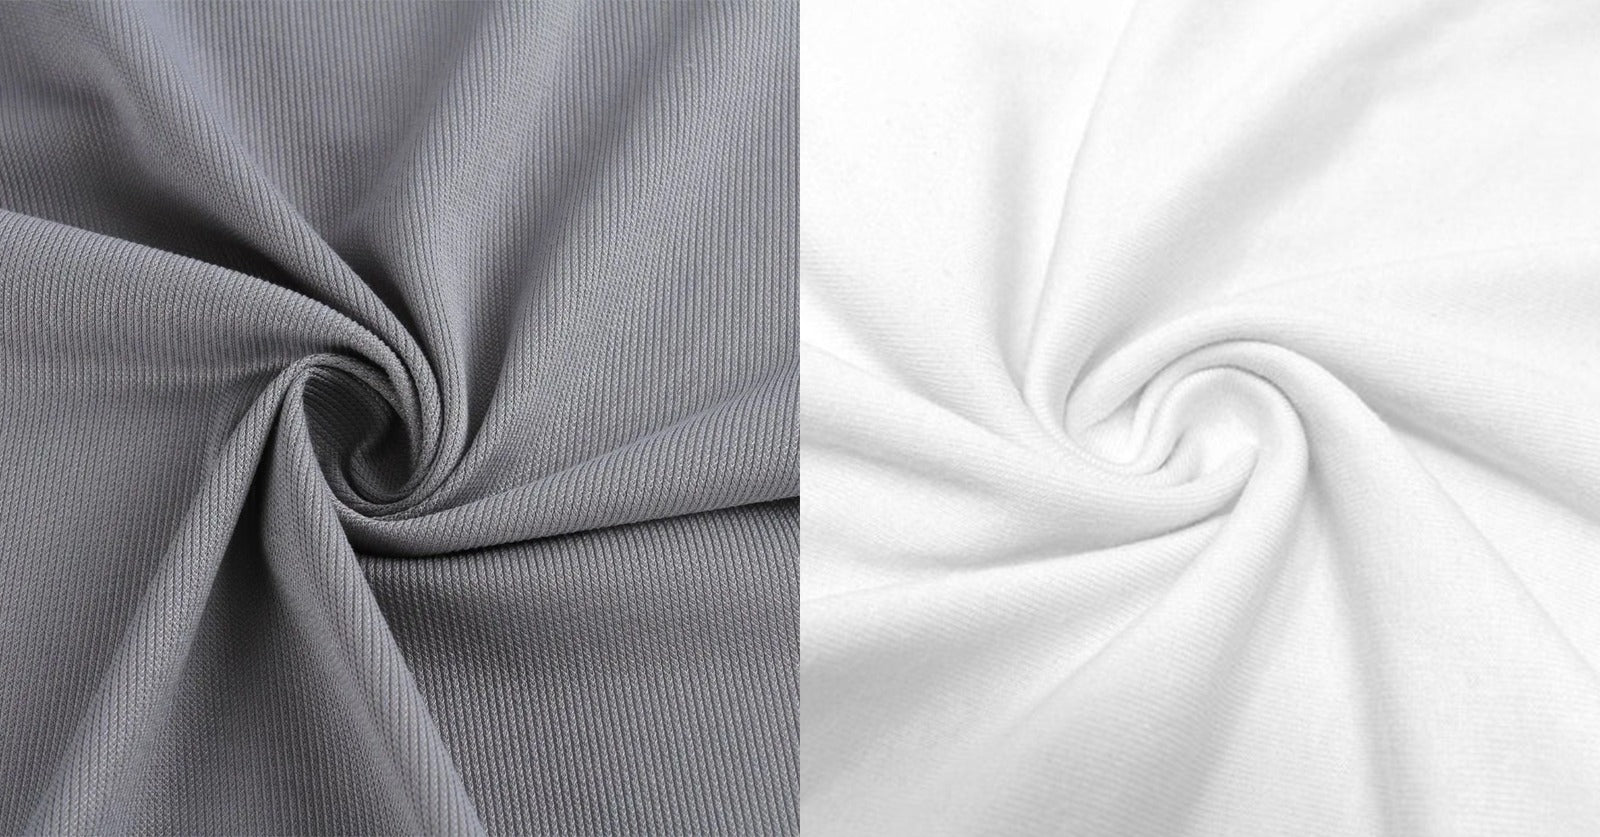 Detailed Guide on Polycotton & Difference Between Polycotton & Cotton